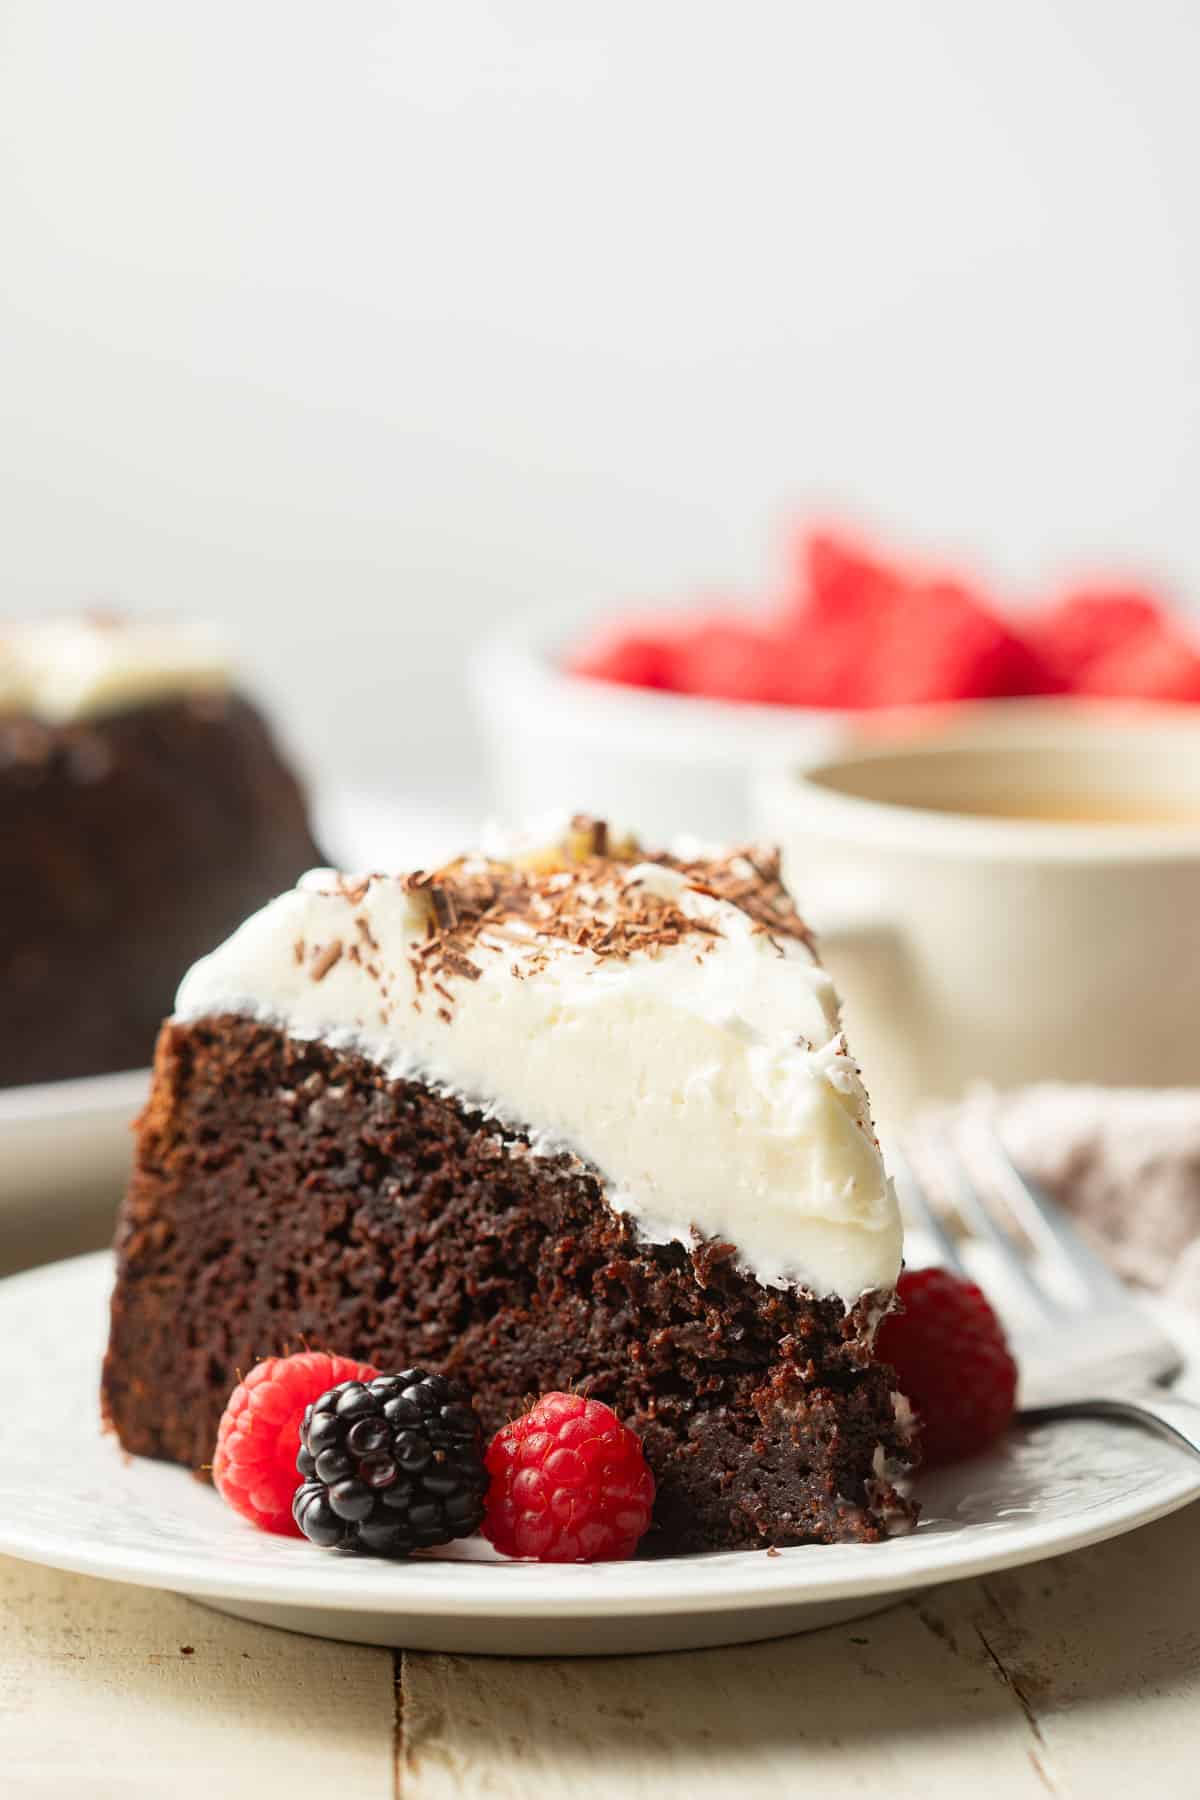 Slice of Vegan Guinness Cake on a dish with coffee cup and bowl of berries in the background.